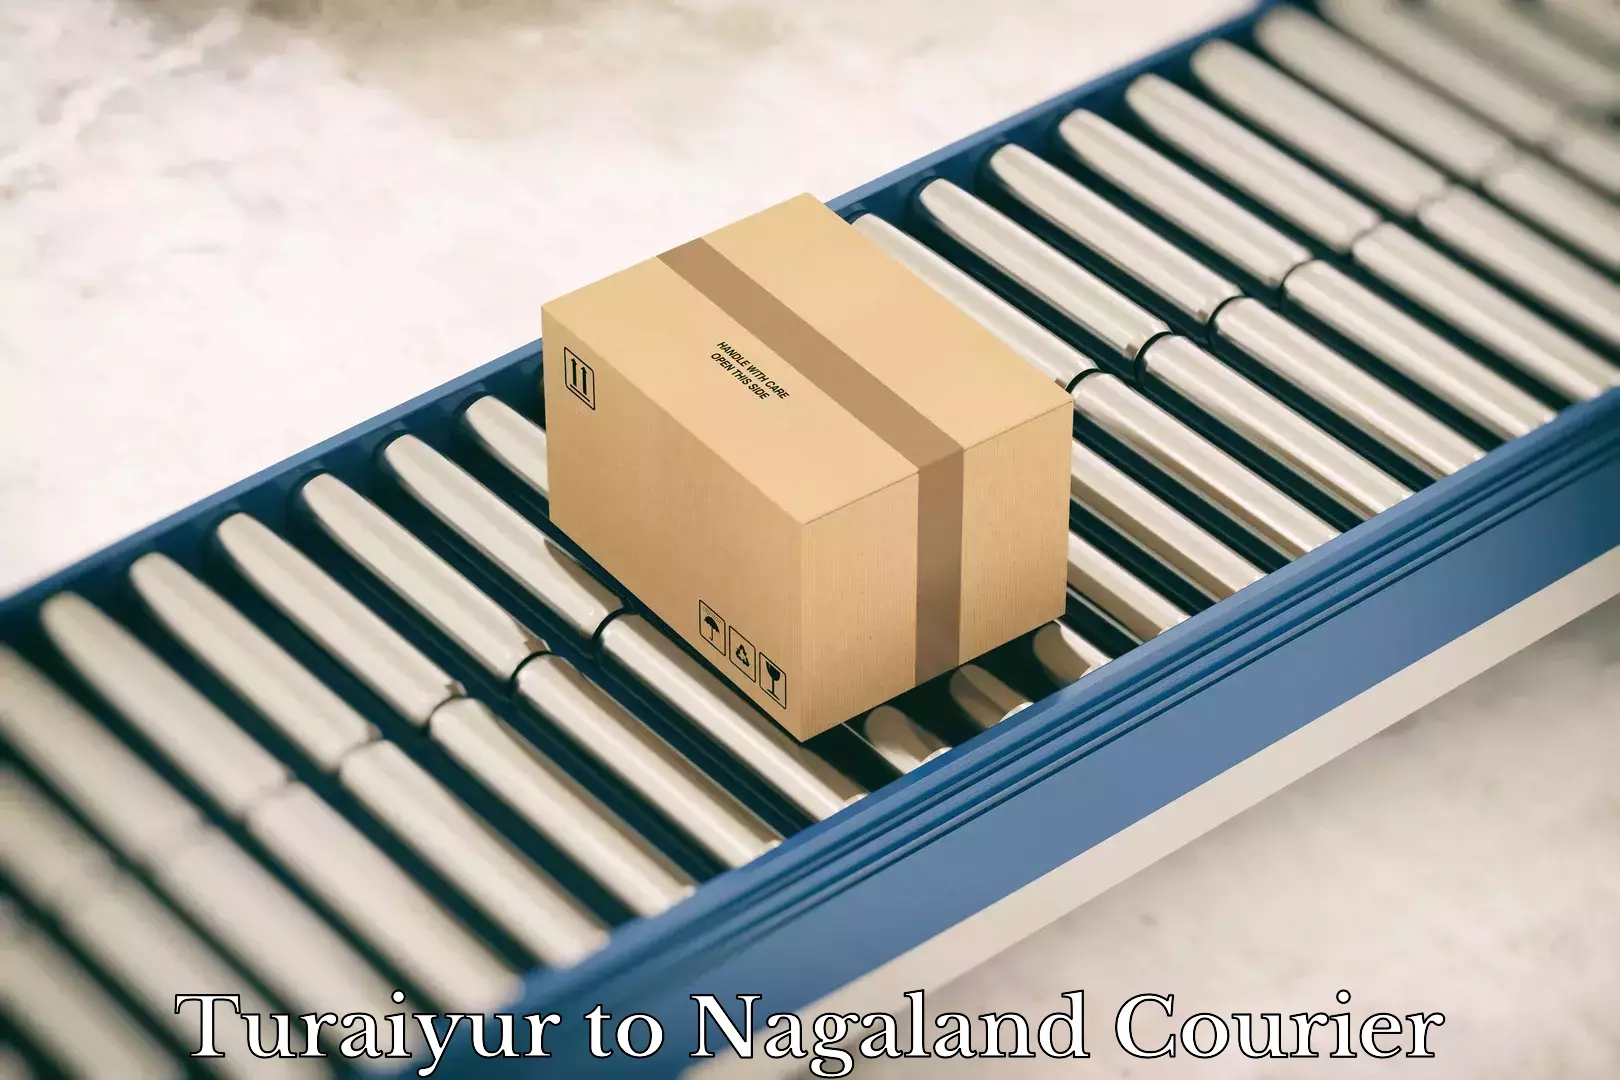 Nationwide courier service Turaiyur to Nagaland